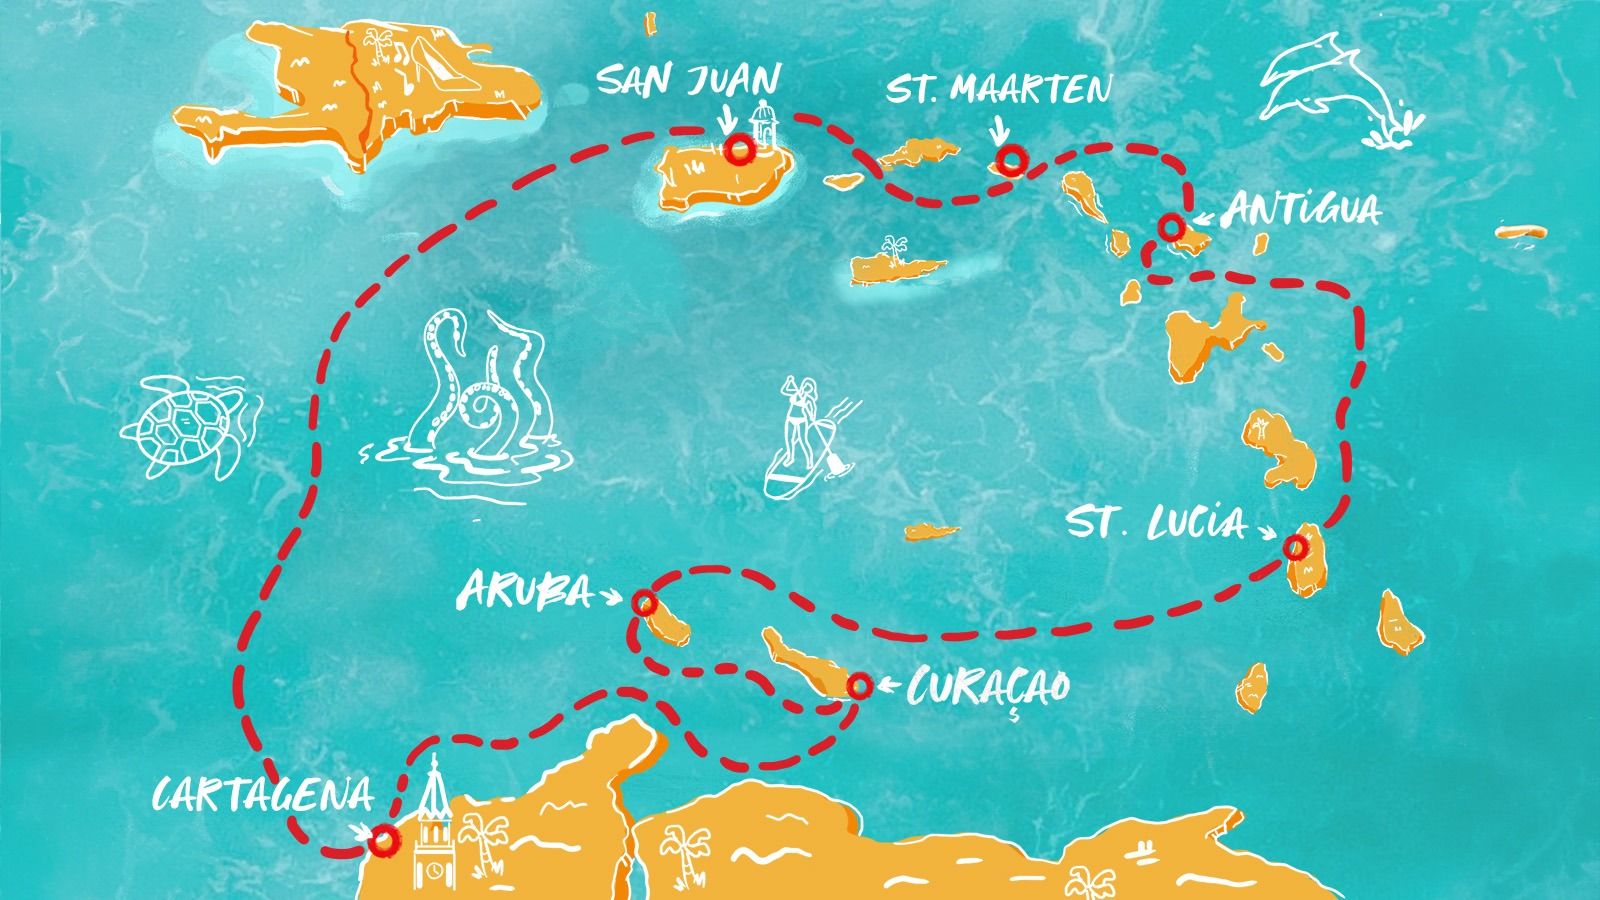 Idyllic Isles of the Caribbean & Colombia Itinerary Map